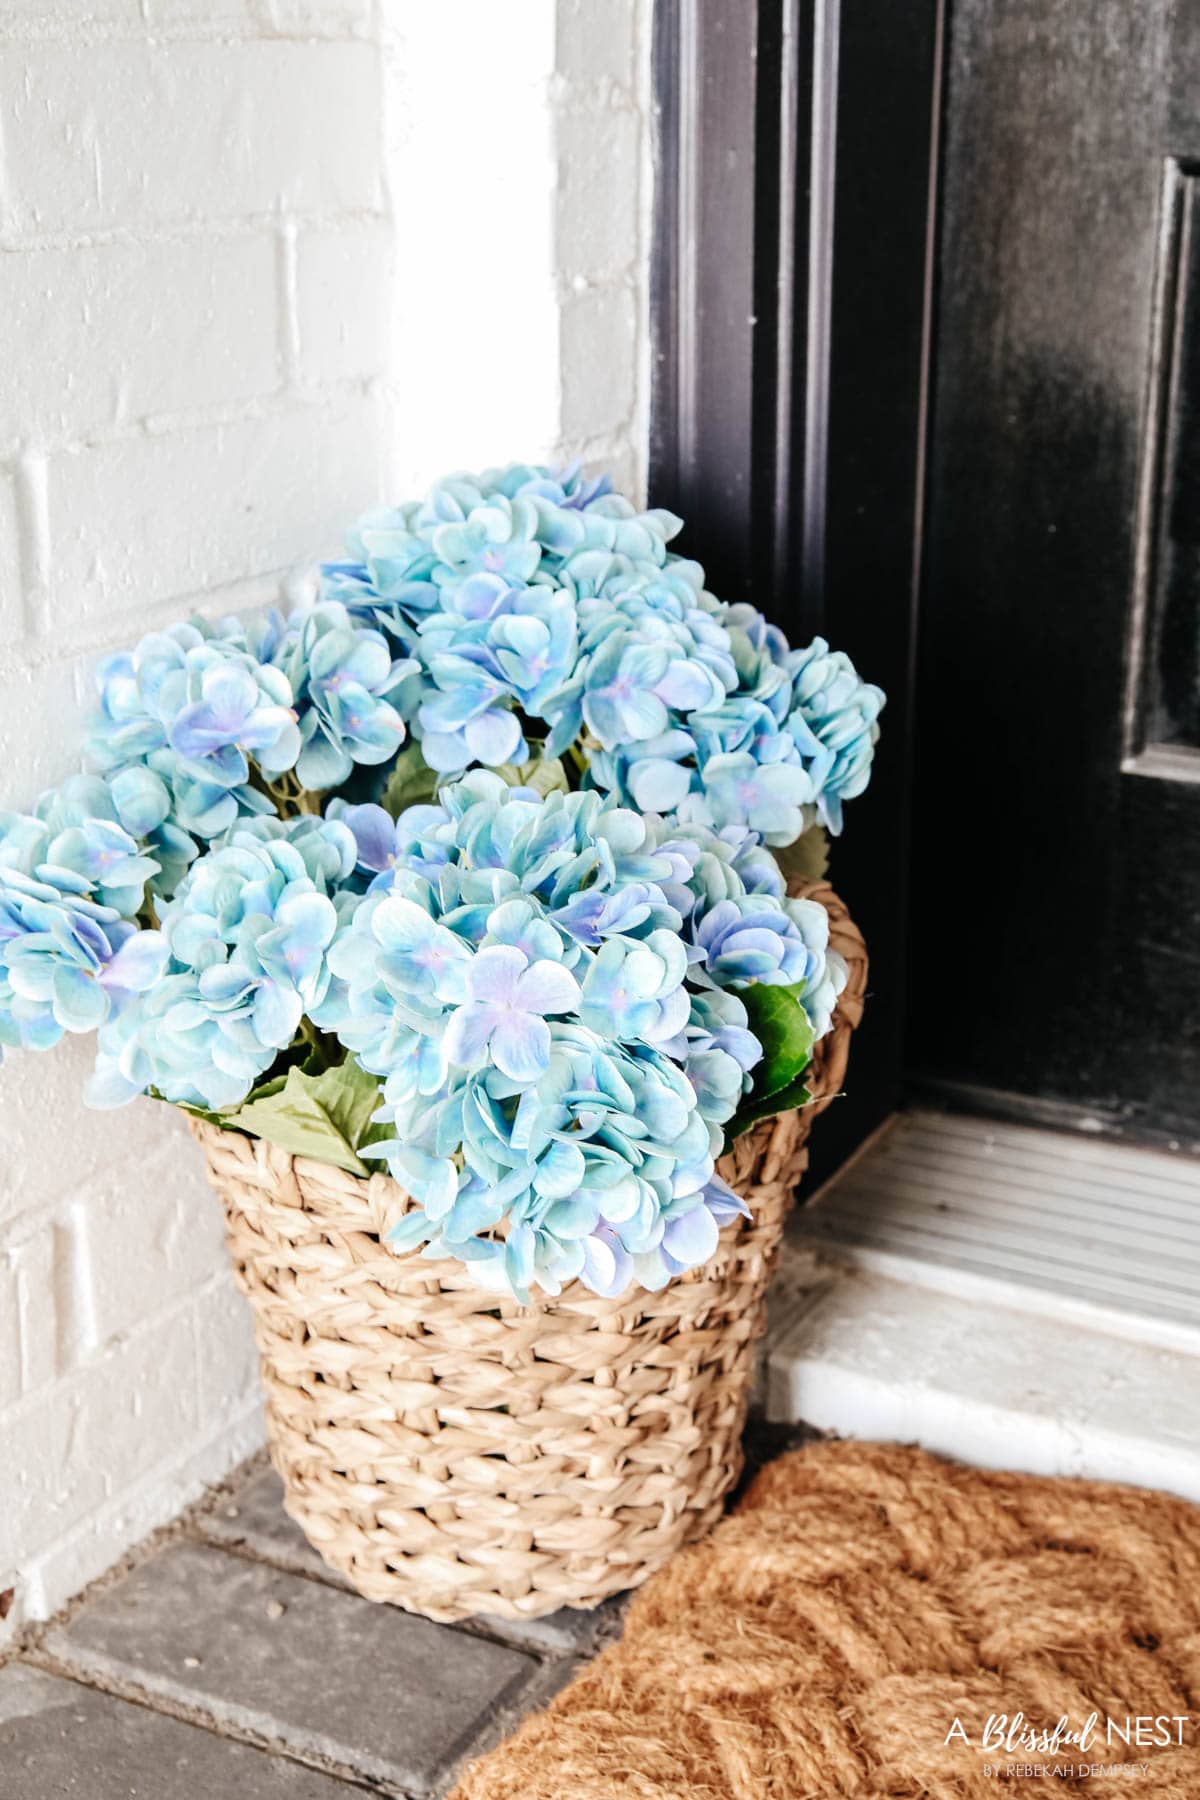 Detail view of small basket filled with light blue hydrangeas